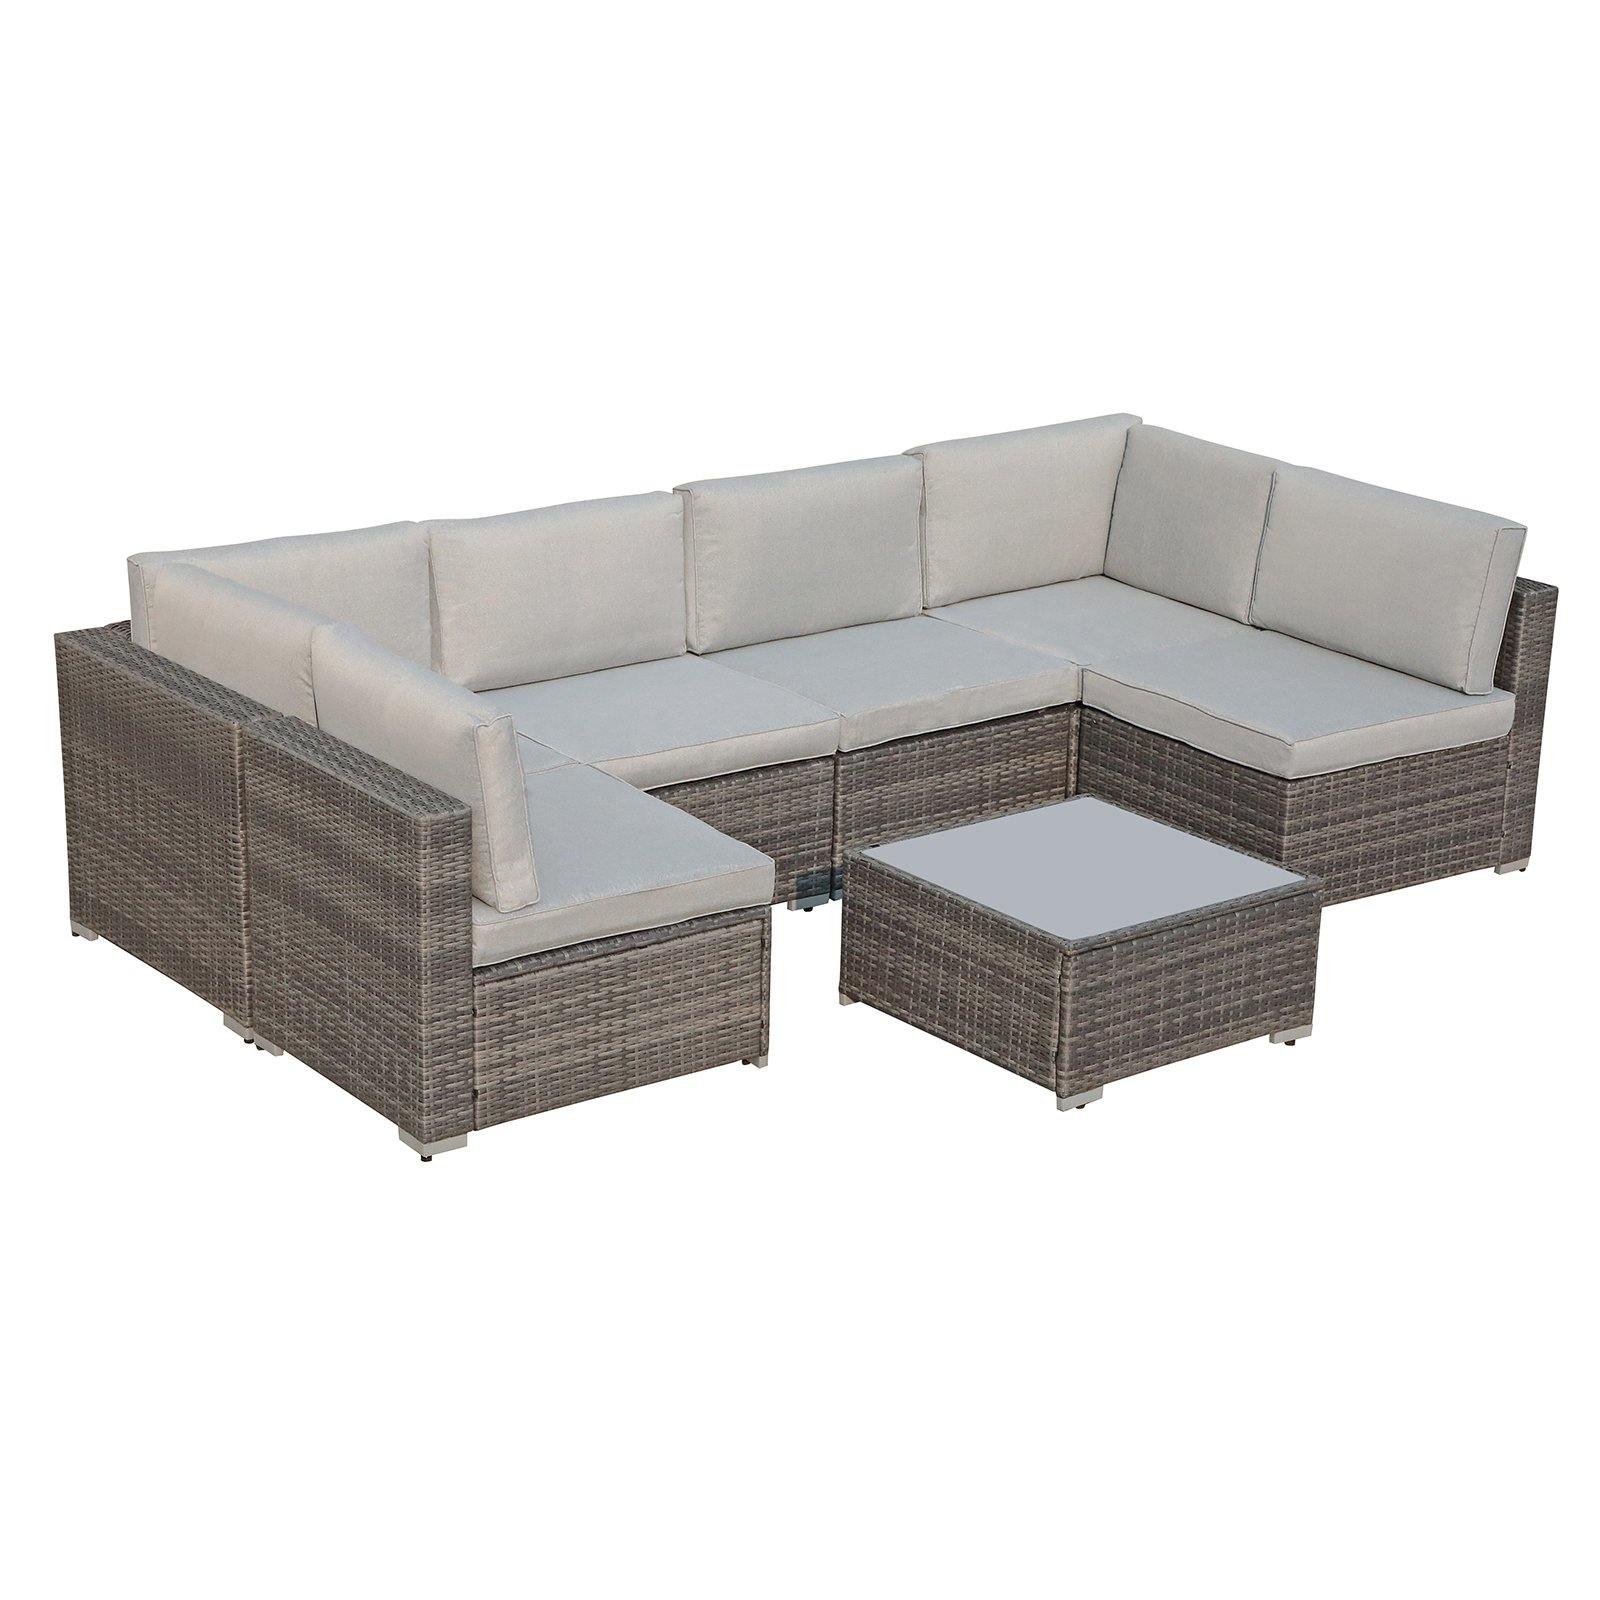 Adonis 7-pc. Outdoor Sectional Set with Grey Cushions - OrangeCasual